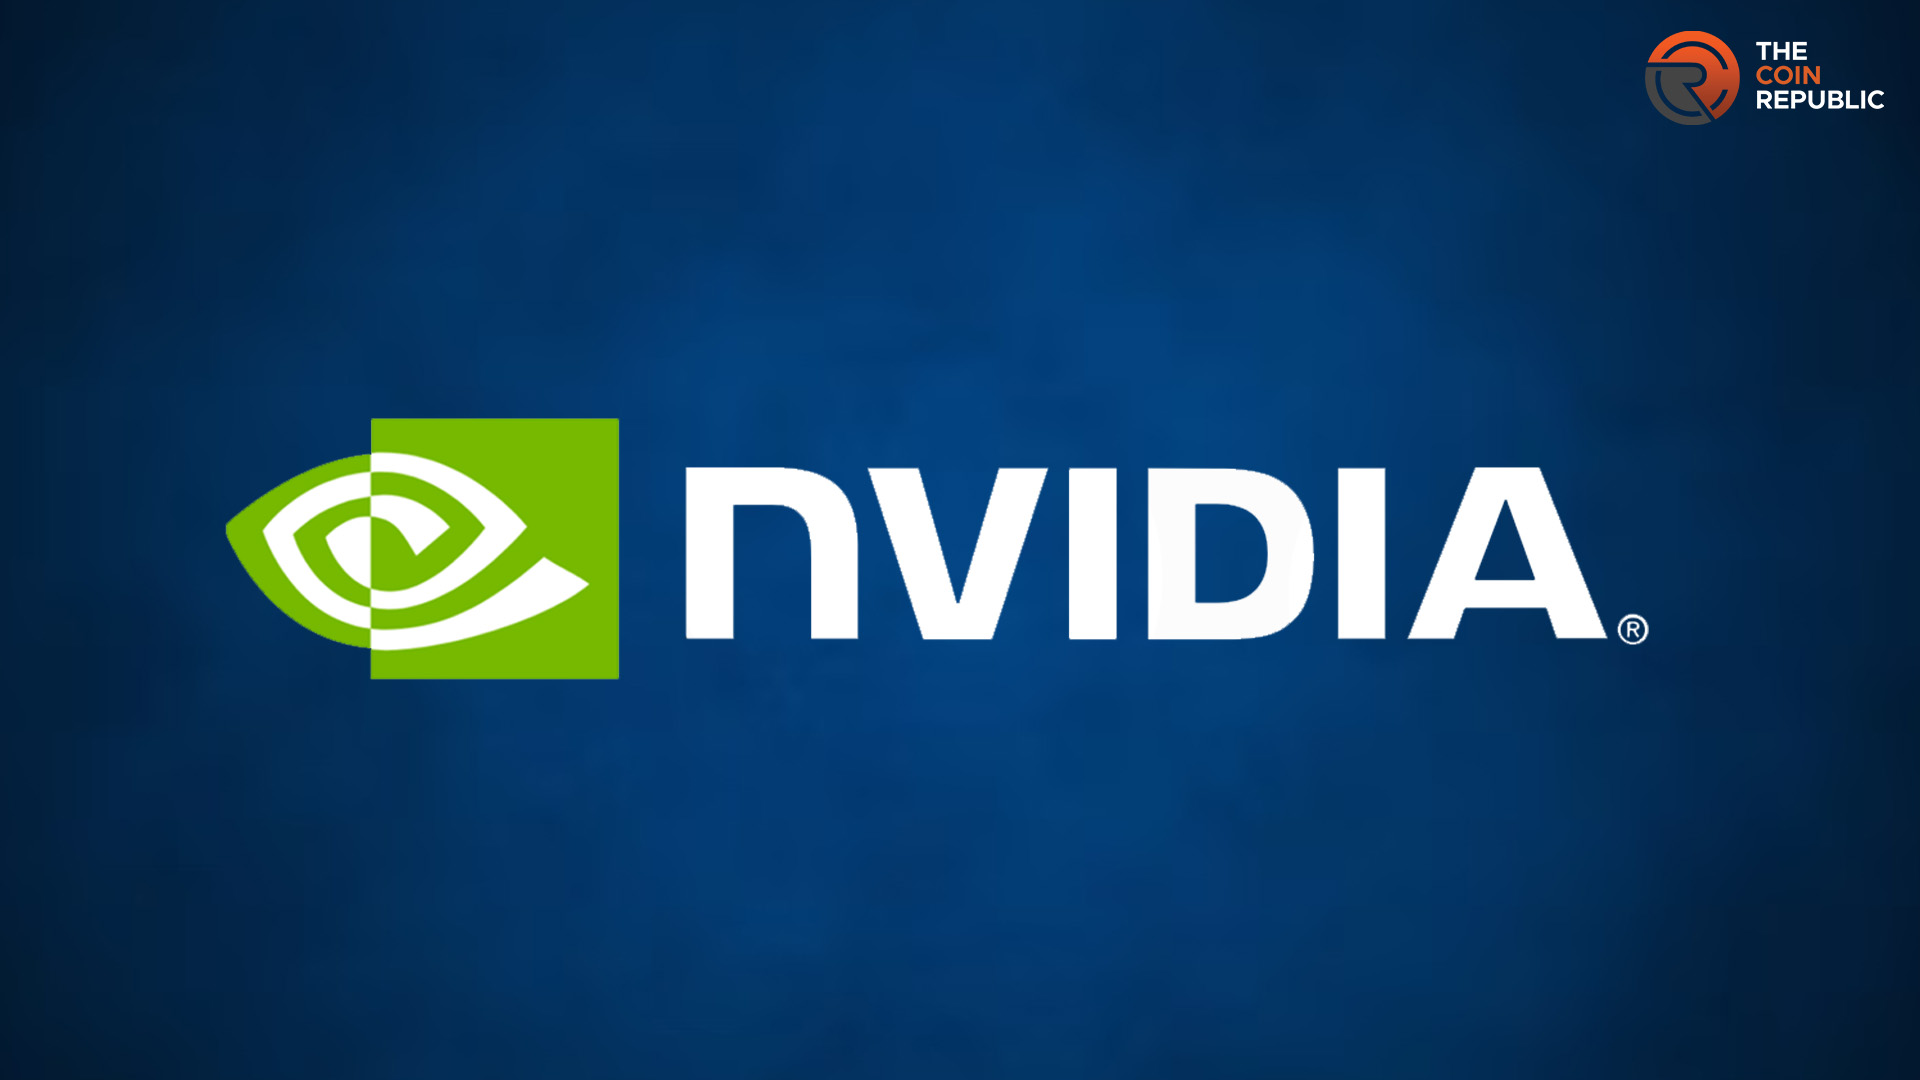 NVIDIA Corp: NVDA Stock Price Plunges, Chip Stock Crisis Report  